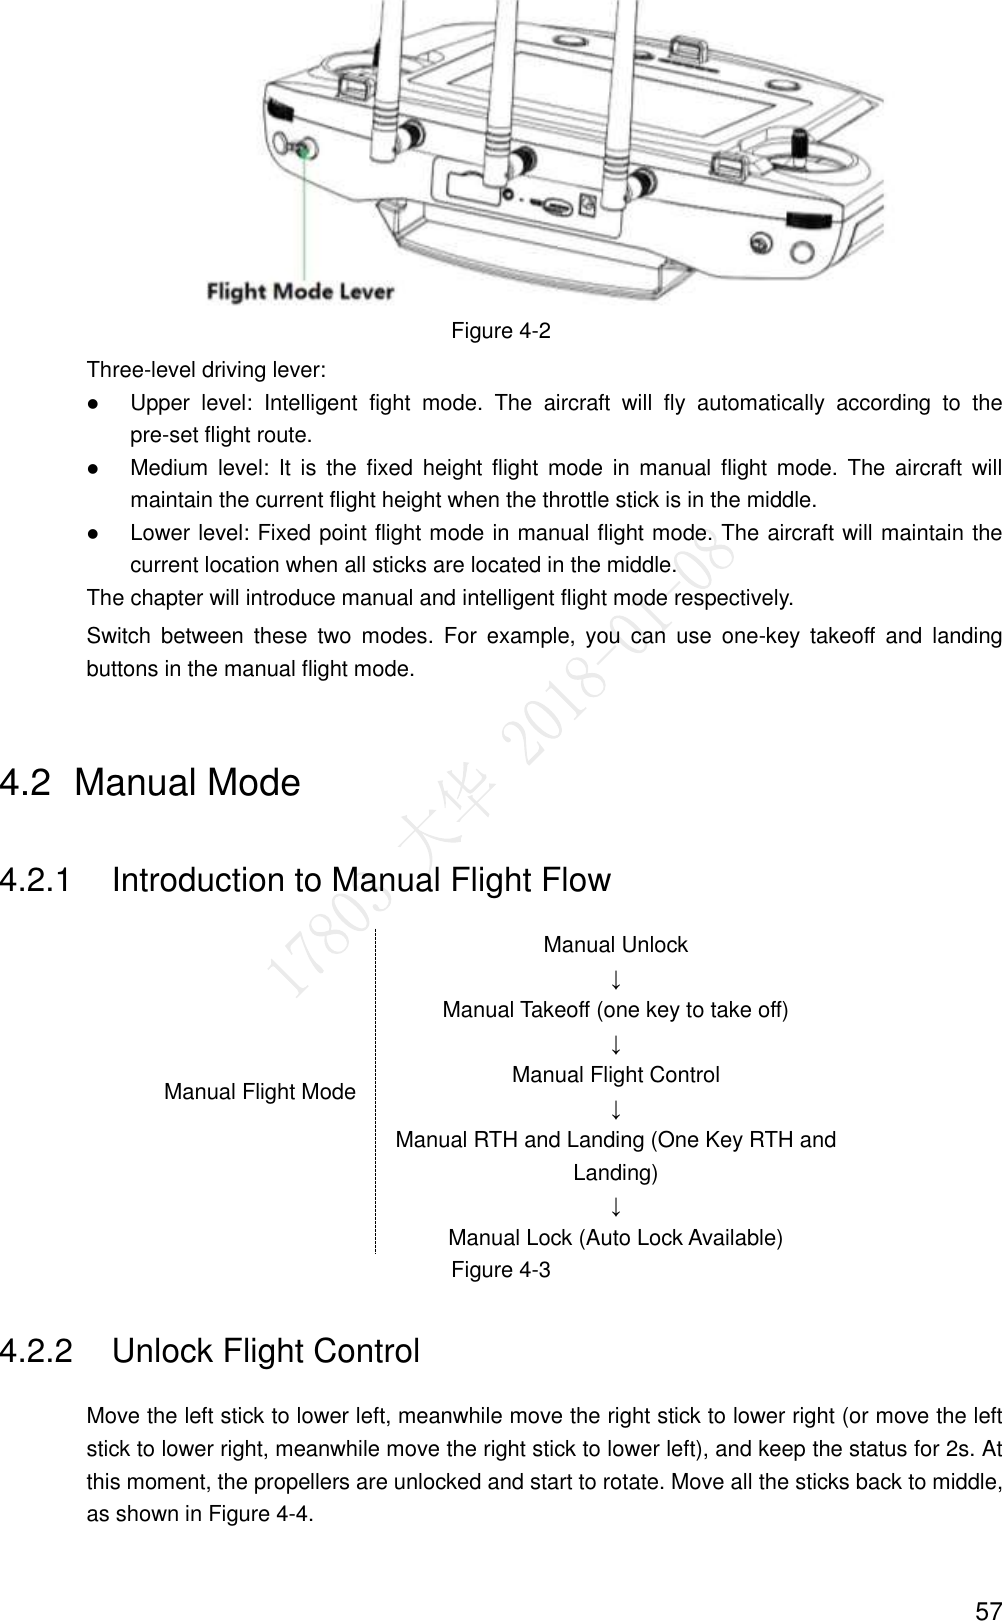  57  Figure 4-2 Three-level driving lever:  Upper  level:  Intelligent  fight  mode.  The  aircraft  will  fly  automatically  according  to  the pre-set flight route.  Medium level:  It  is  the  fixed  height  flight  mode  in manual  flight mode.  The  aircraft  will maintain the current flight height when the throttle stick is in the middle.  Lower level: Fixed point flight mode in manual flight mode. The aircraft will maintain the current location when all sticks are located in the middle. The chapter will introduce manual and intelligent flight mode respectively. Switch  between  these  two  modes.  For  example,  you  can  use  one-key  takeoff  and  landing buttons in the manual flight mode. 4.2  Manual Mode 4.2.1  Introduction to Manual Flight Flow Manual Flight Mode Manual Unlock ↓ Manual Takeoff (one key to take off) ↓ Manual Flight Control ↓ Manual RTH and Landing (One Key RTH and Landing) ↓ Manual Lock (Auto Lock Available) Figure 4-3 4.2.2  Unlock Flight Control Move the left stick to lower left, meanwhile move the right stick to lower right (or move the left stick to lower right, meanwhile move the right stick to lower left), and keep the status for 2s. At this moment, the propellers are unlocked and start to rotate. Move all the sticks back to middle, as shown in Figure 4-4. 